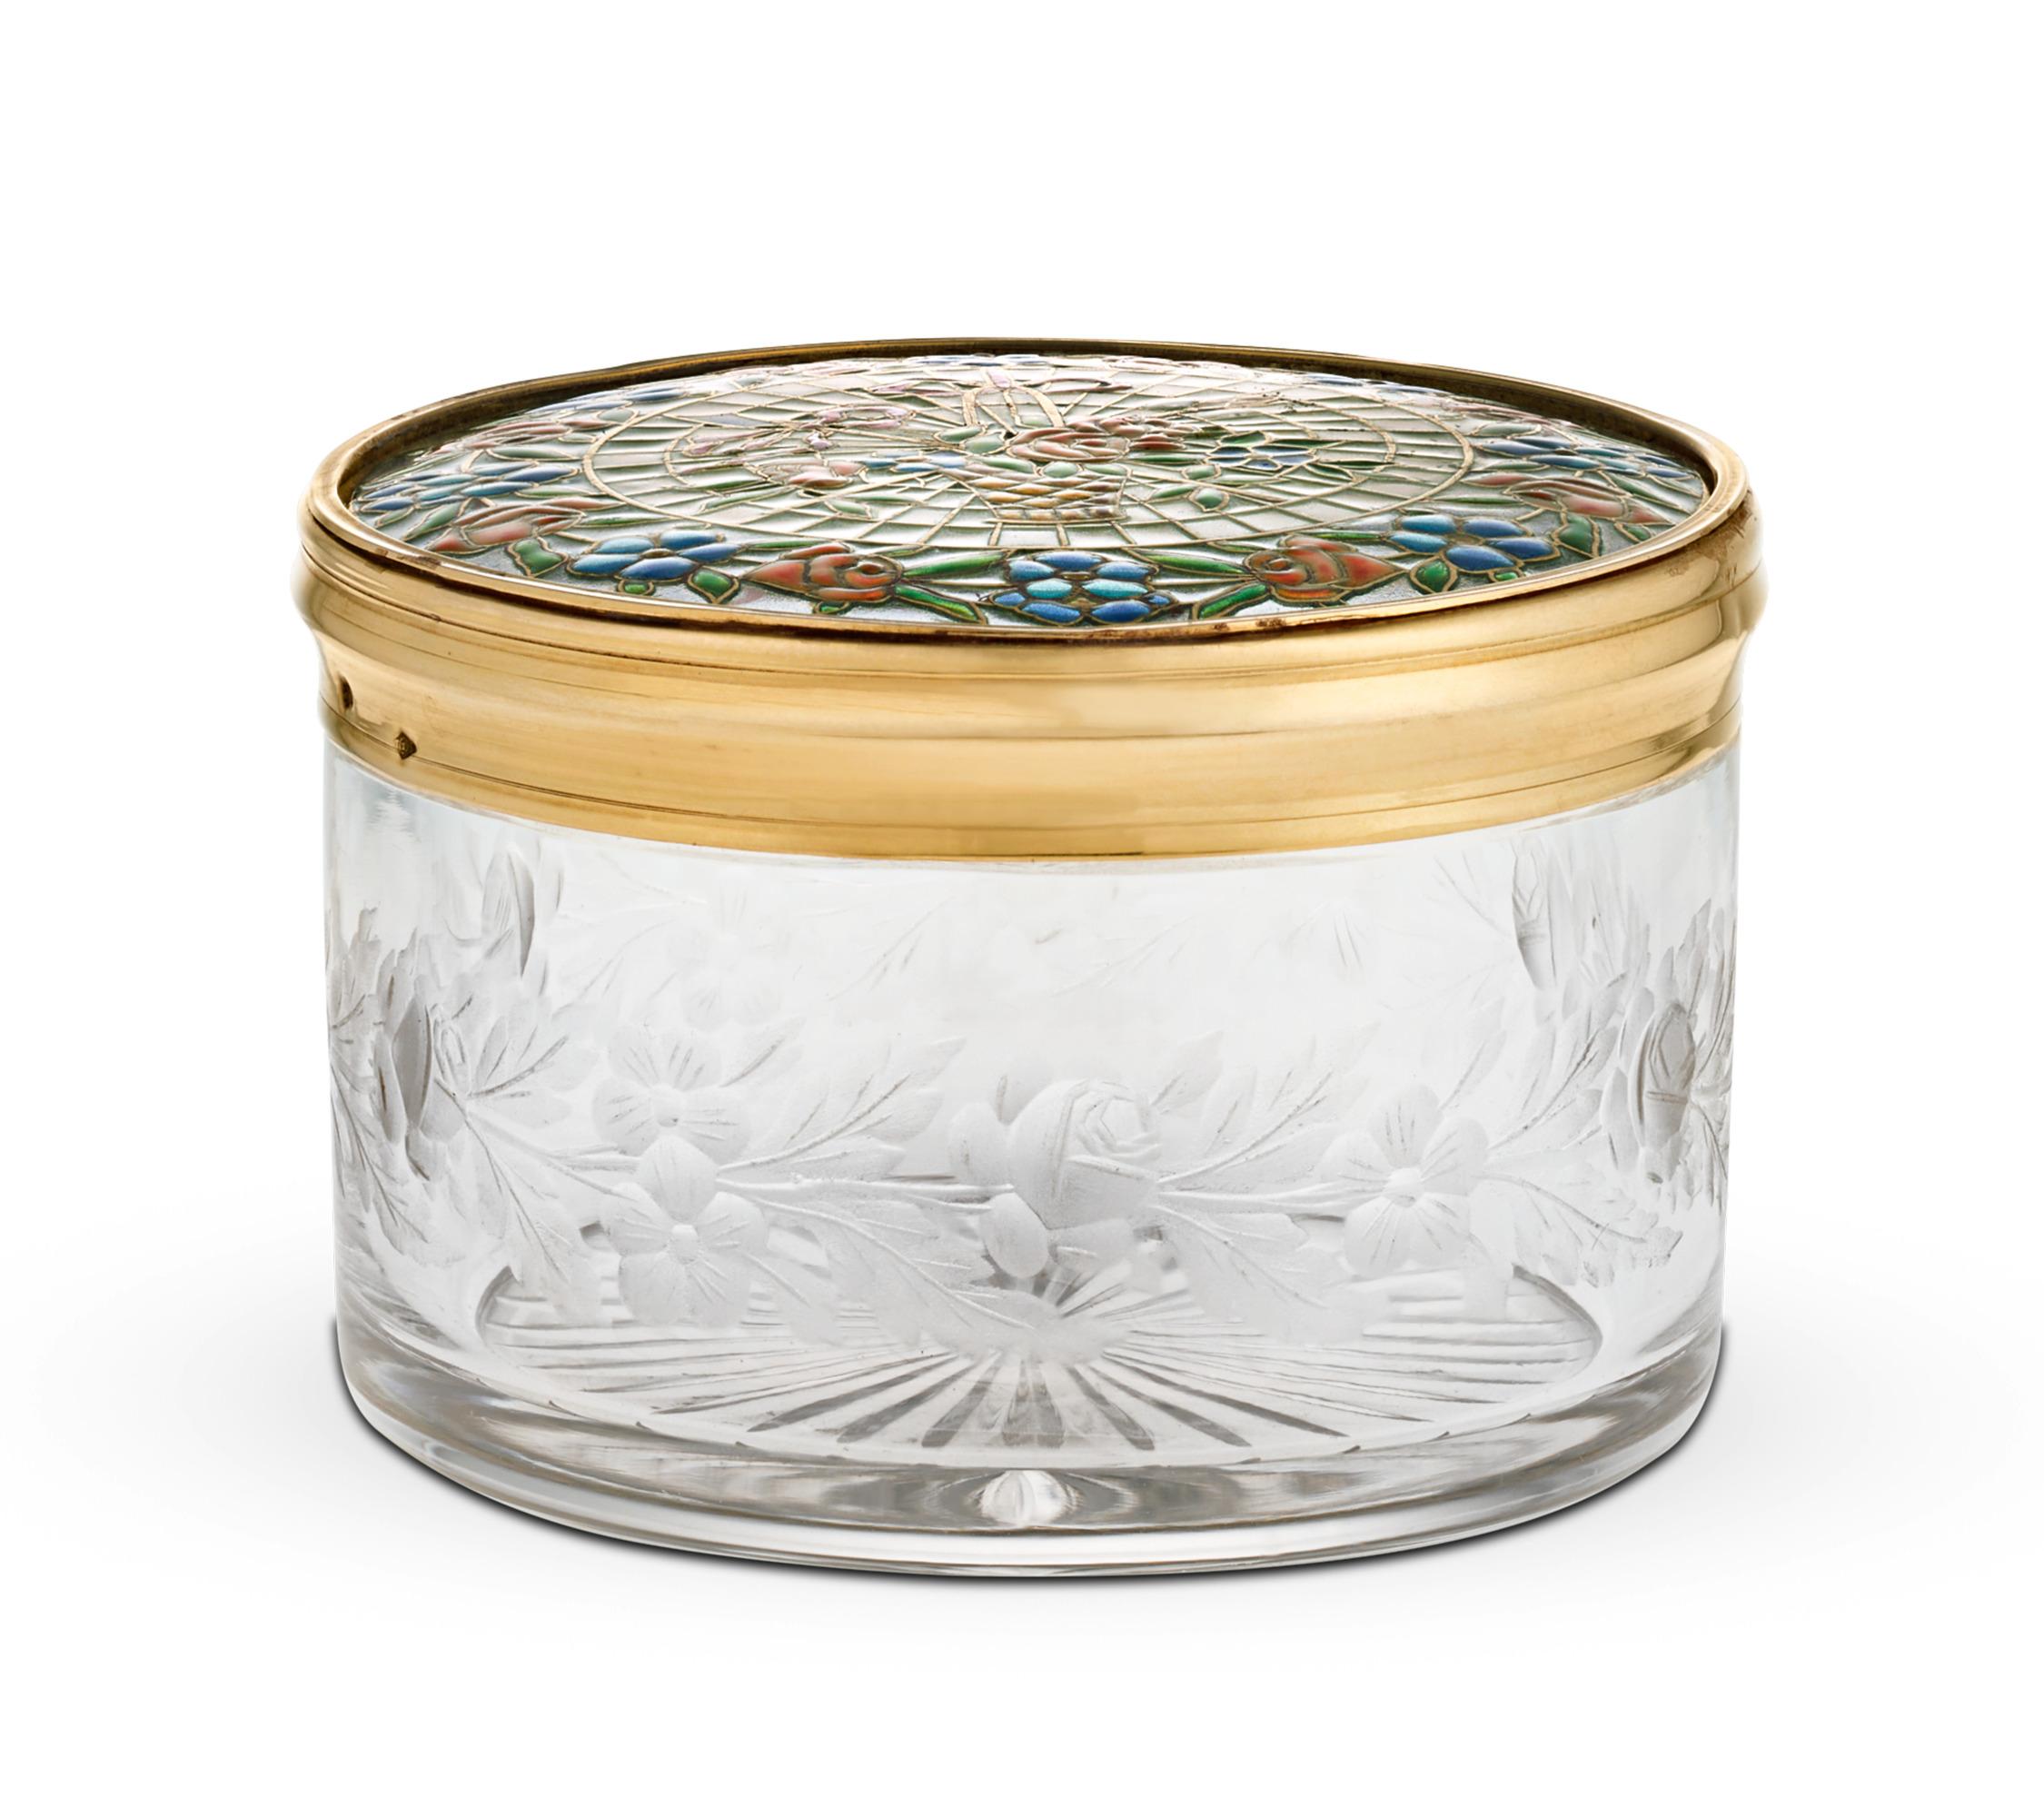 Crafted entirely with an exceptionally detailed enamel technique known as pliqué-à-jour, this French box is a luxurious objet d'art. Exhibiting a subtle translucence like that of stained glass, a floral border surrounds a delightful bouquet. Not to